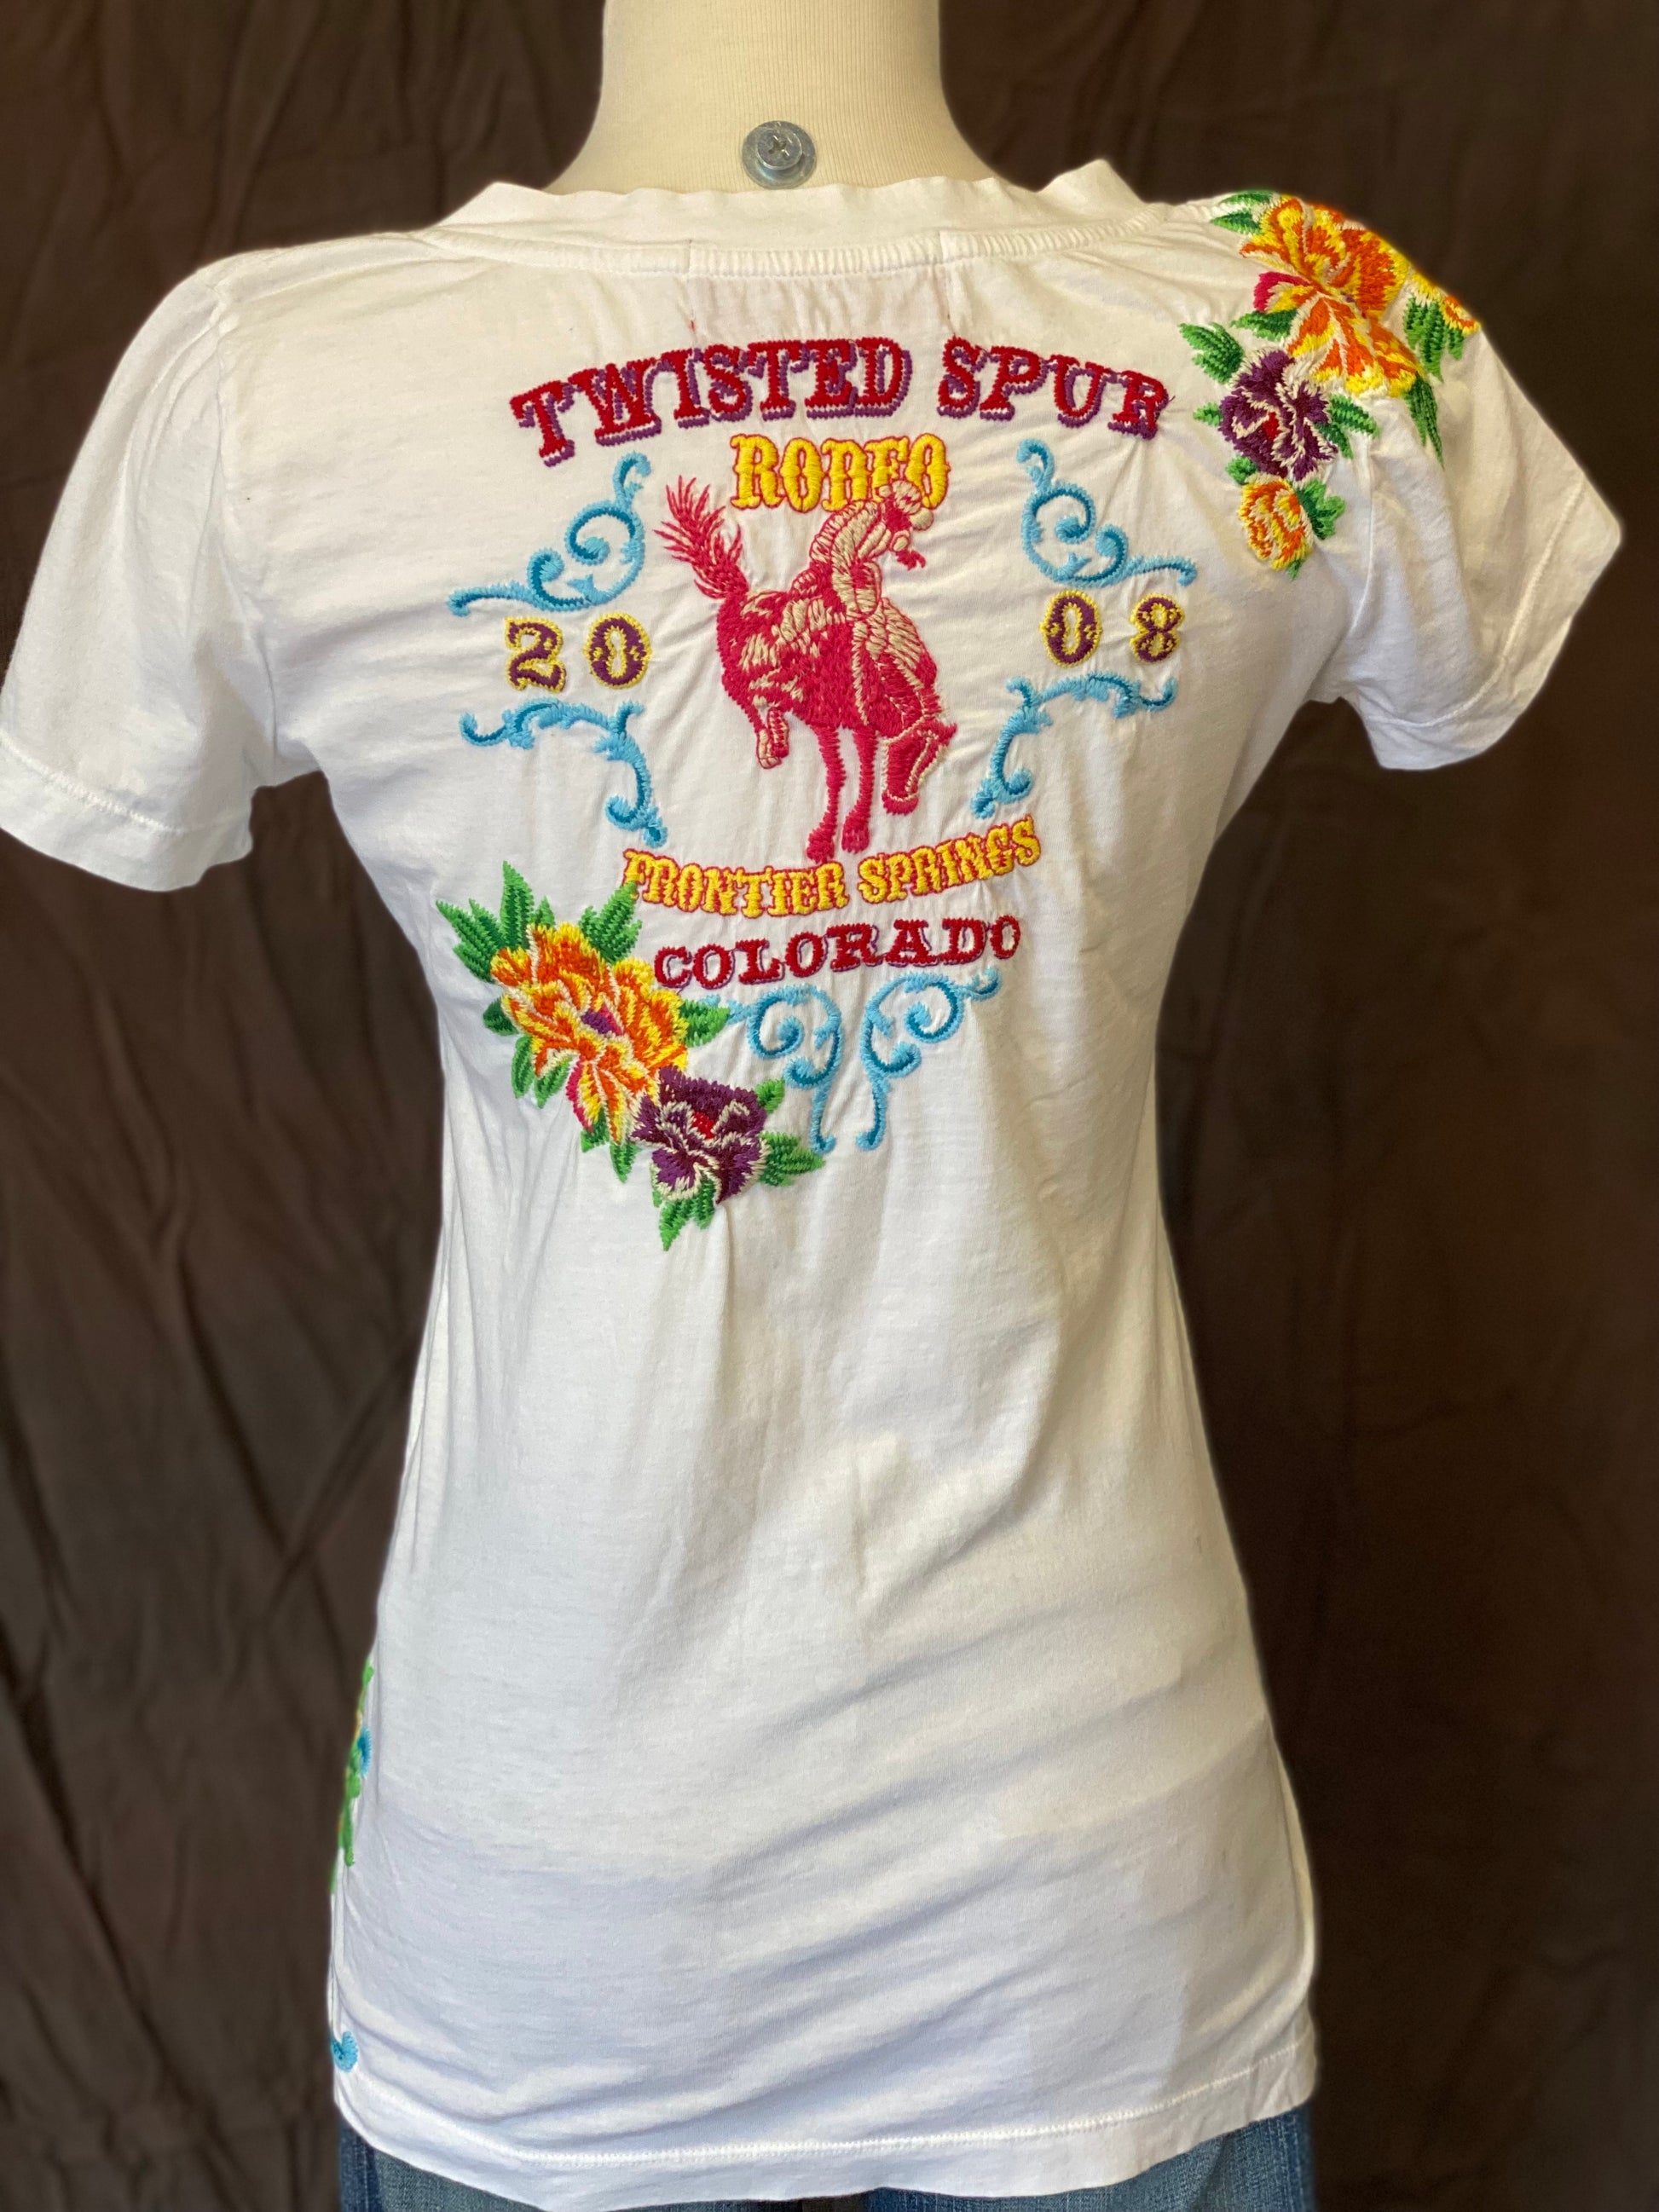 Johnny Was Twisted Spur Rodeo V Neck Tee - Pistol Annie's Boutique